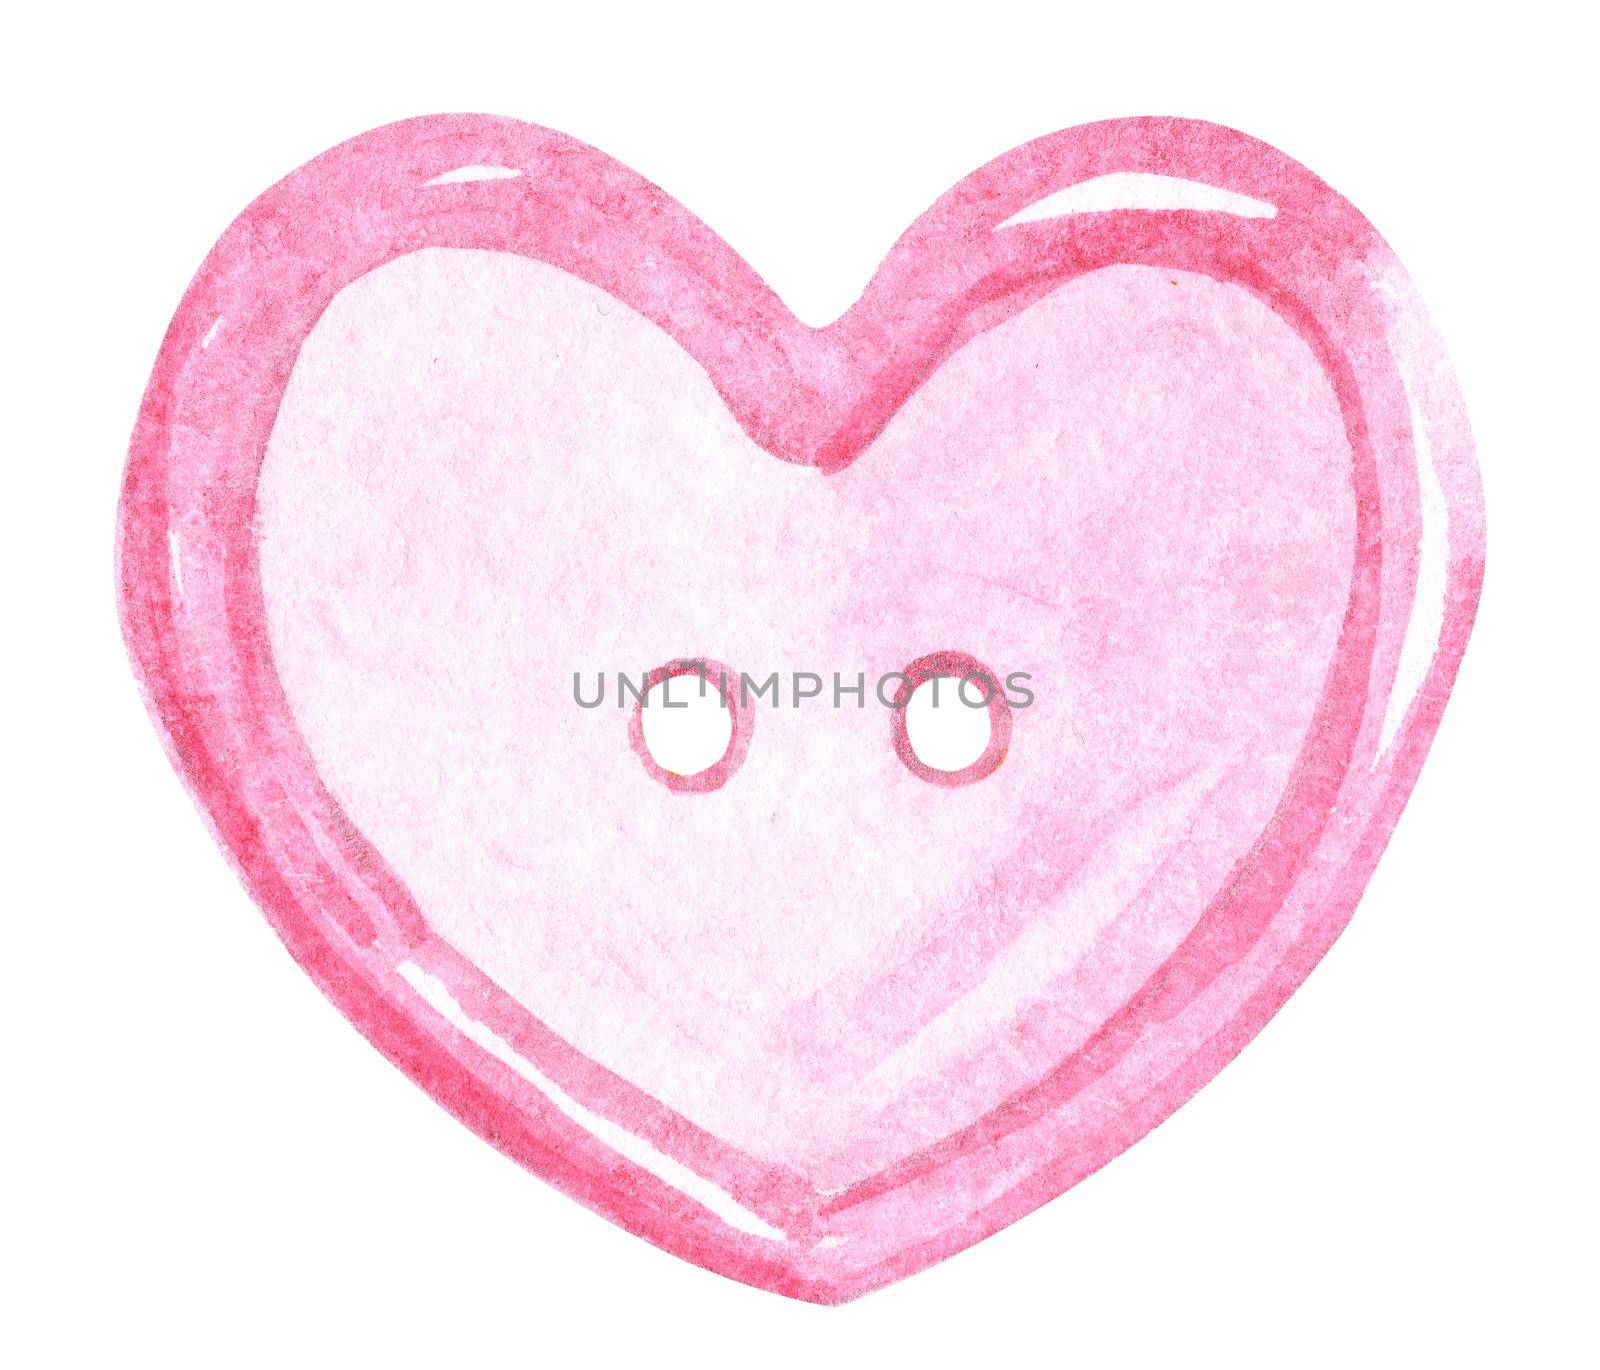 watercolor pink sew button heart isolated on white background